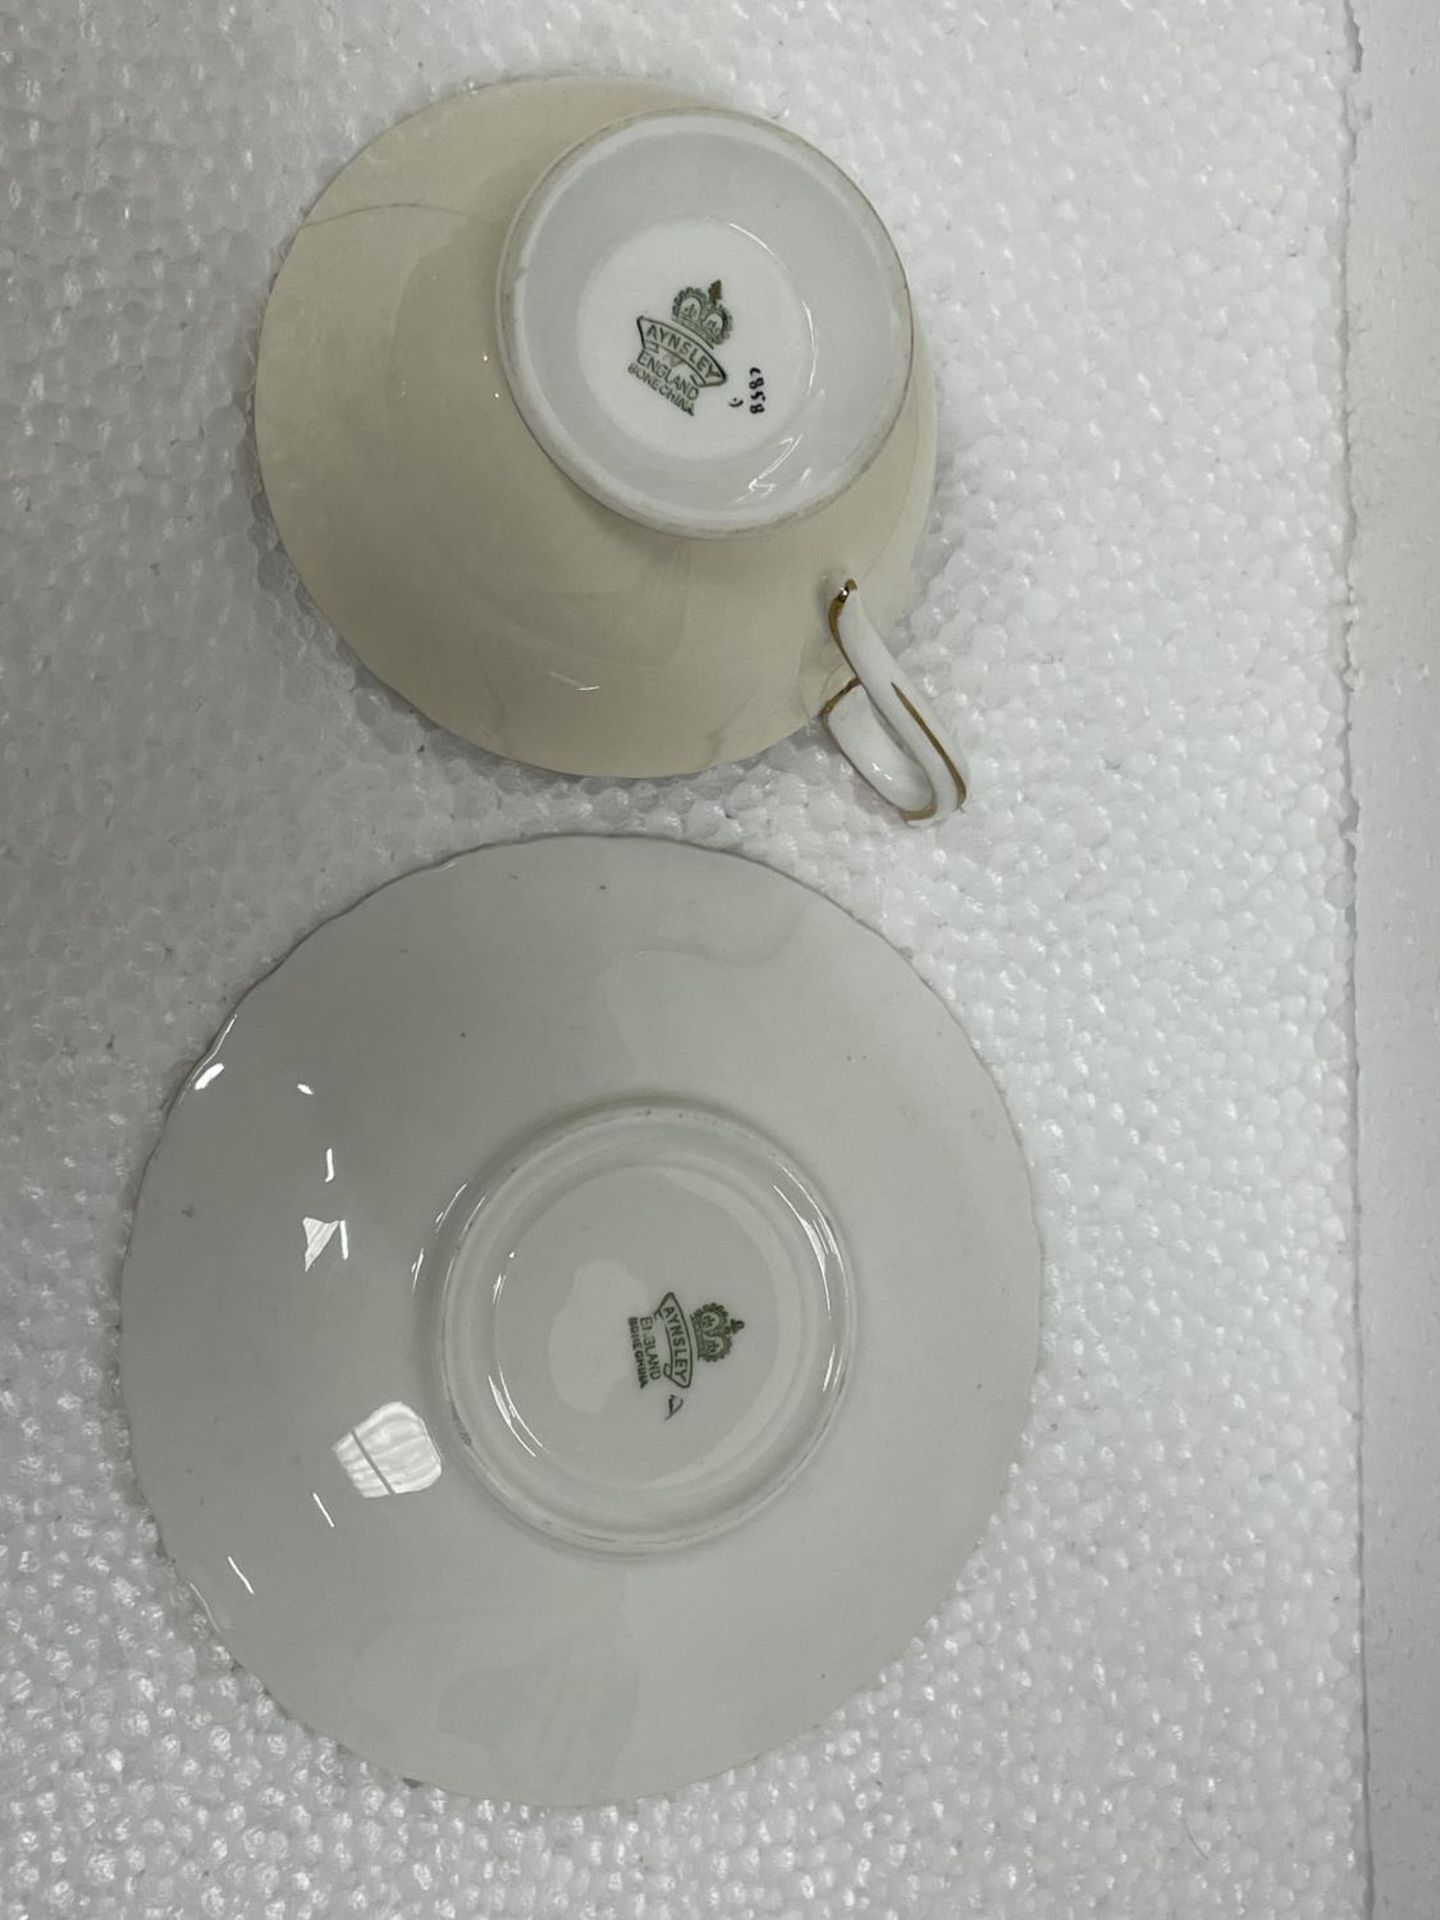 AN AYNSLEY J A BAILEY CABINET CUP AND SAUCER (HAIRLINE CRACK IN CUP) - Image 5 of 5